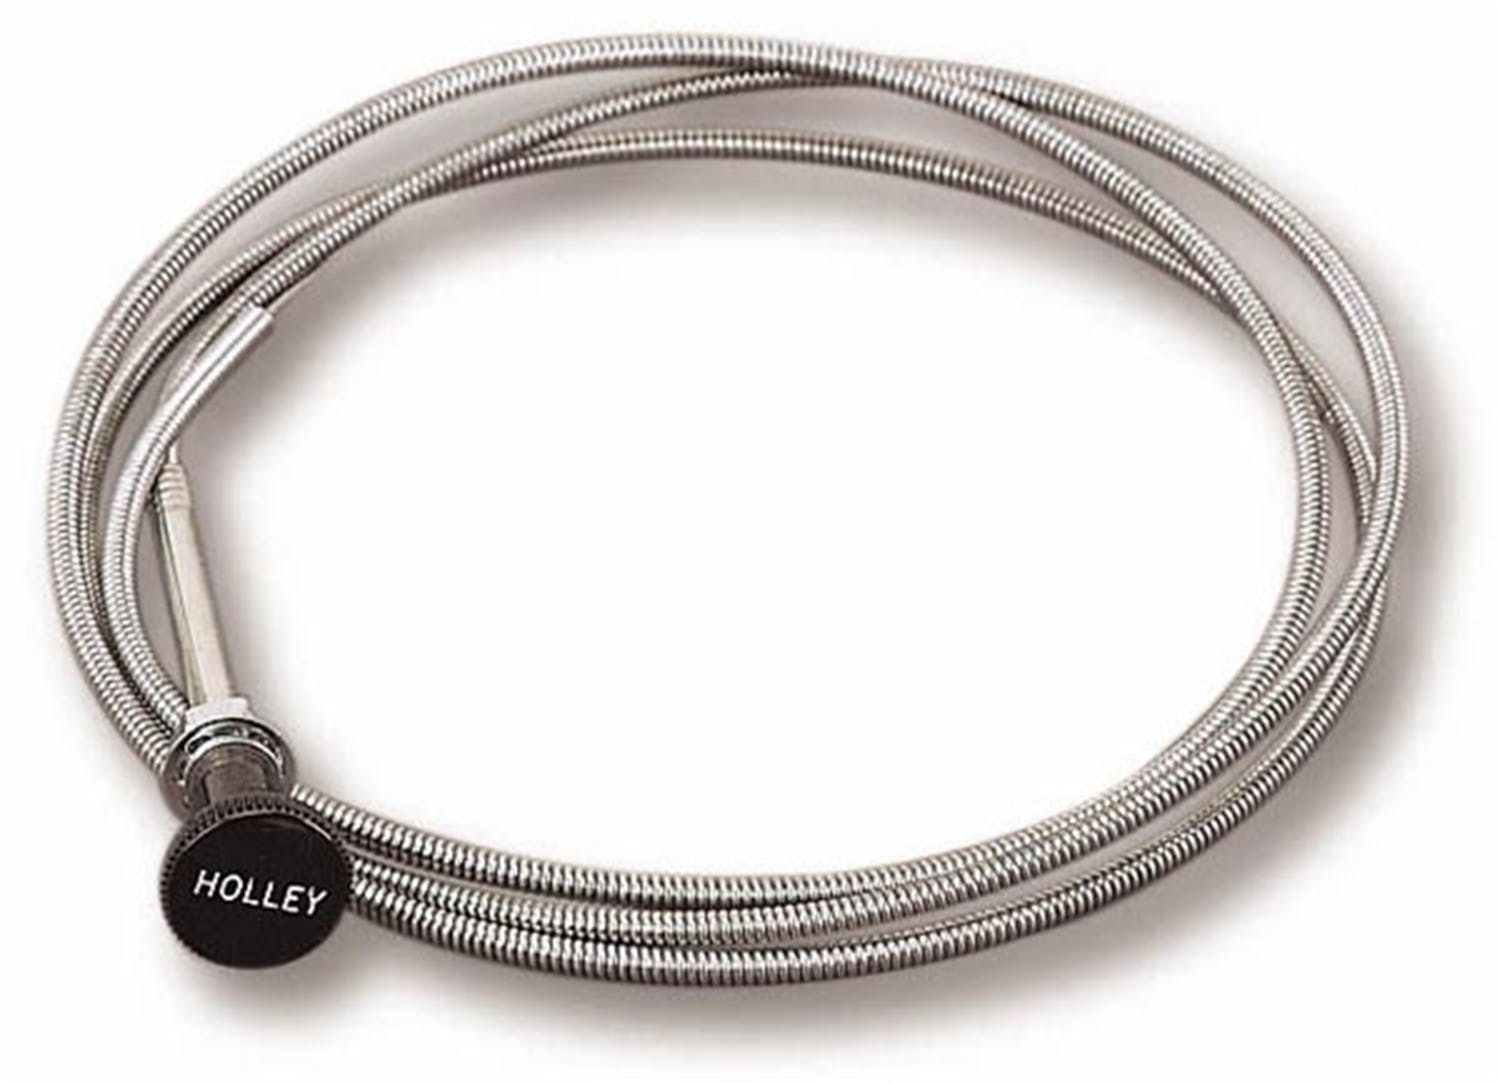 Holley 45-228 CHOKE CONTROL CABLE